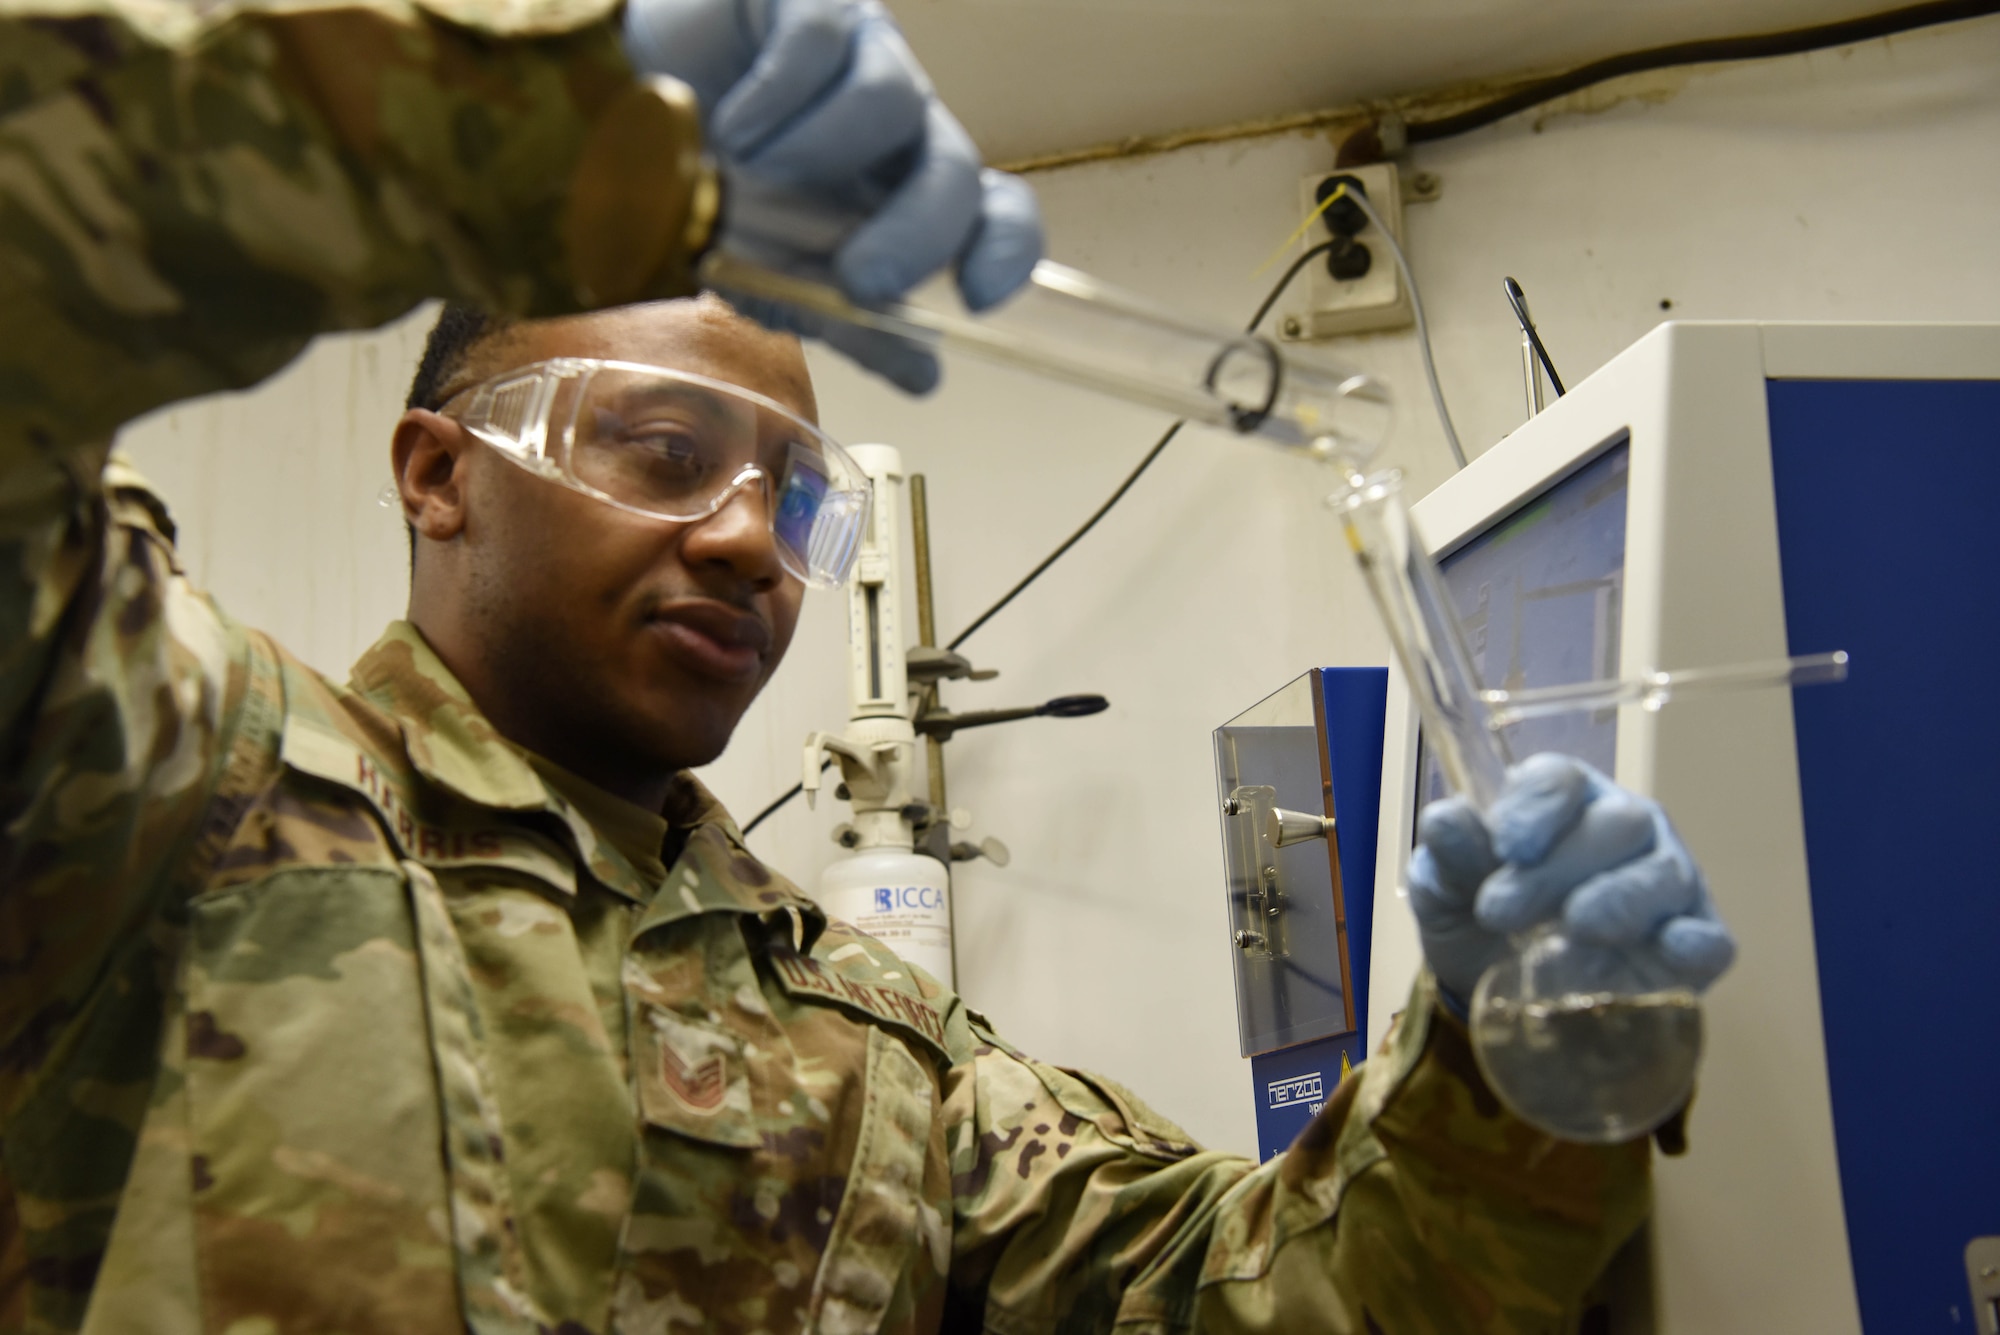 The 379th Expeditionary Logistics Readiness Squadron provides a “home” for the Air Force Petroleum Office. The team of three provides quality assurance and control of fuels and gases for the U.S. Central Command area of responsibility.